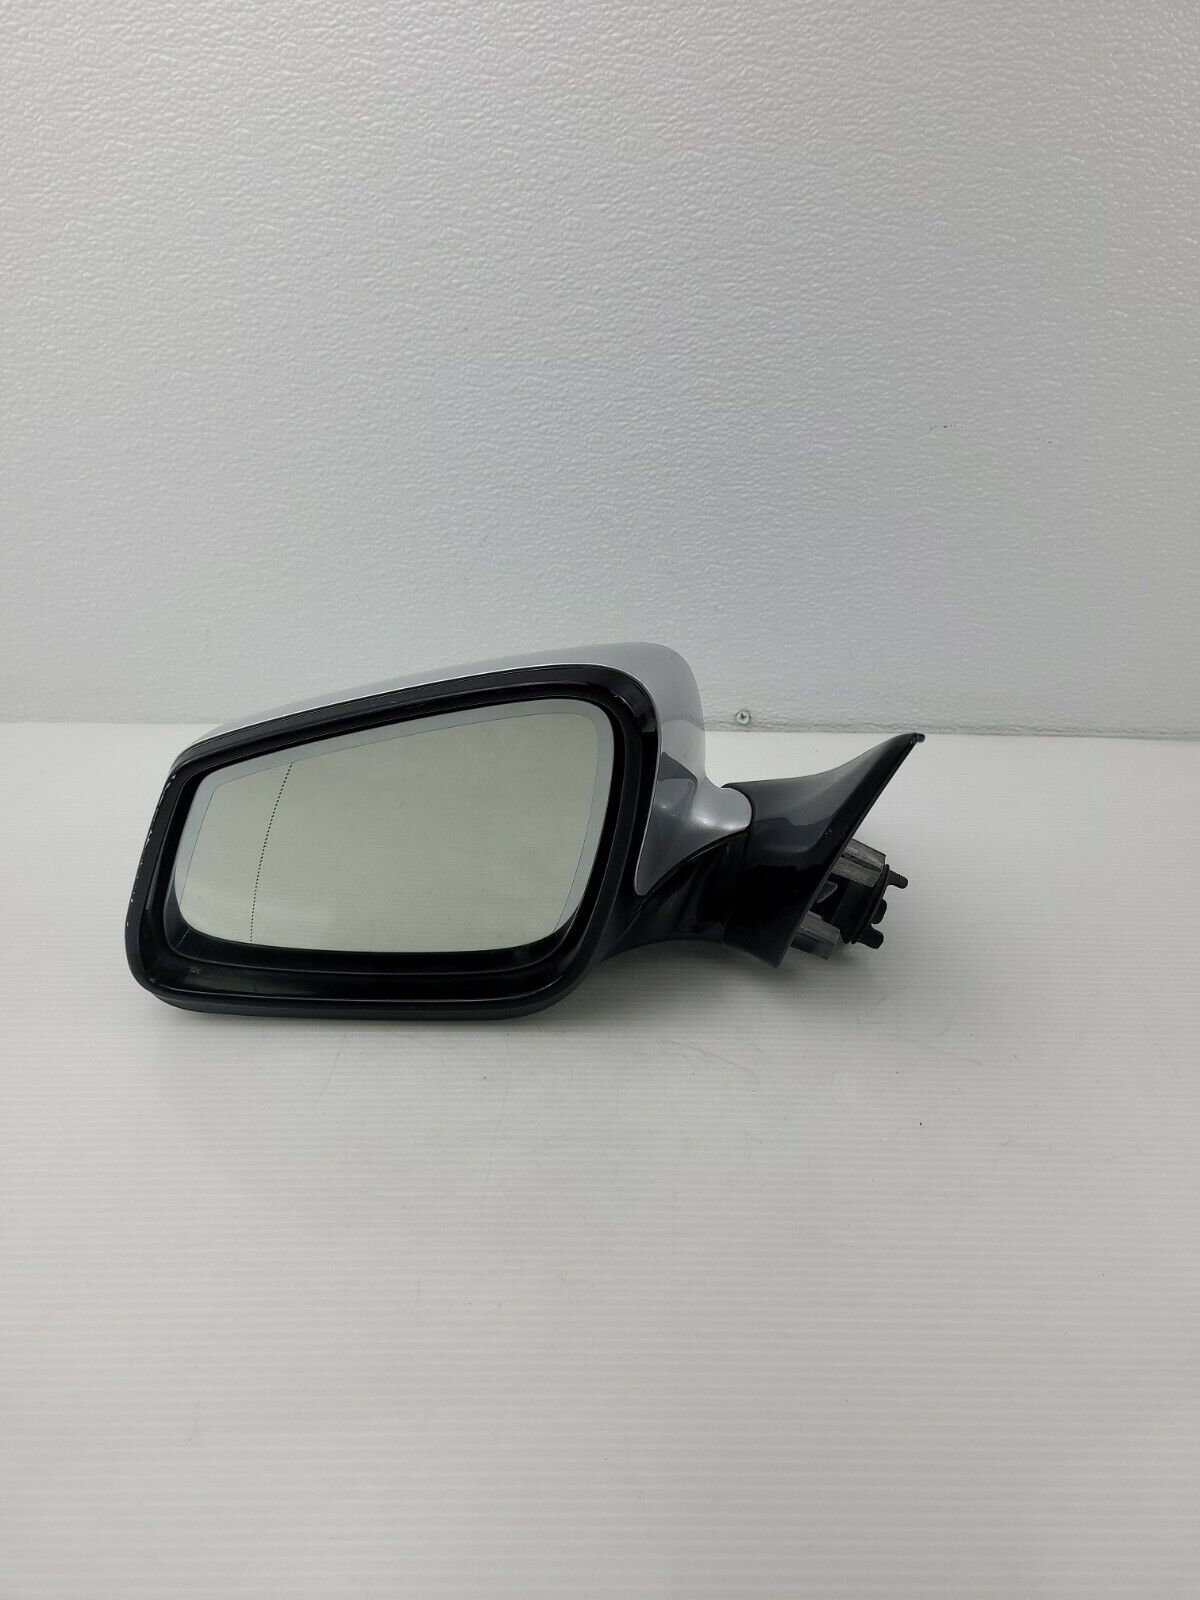 2012 - 2015 BMW 650I LEFT DRIVER SIDE REAR VIEW MIRROR SILVER EURO GLASS OEM